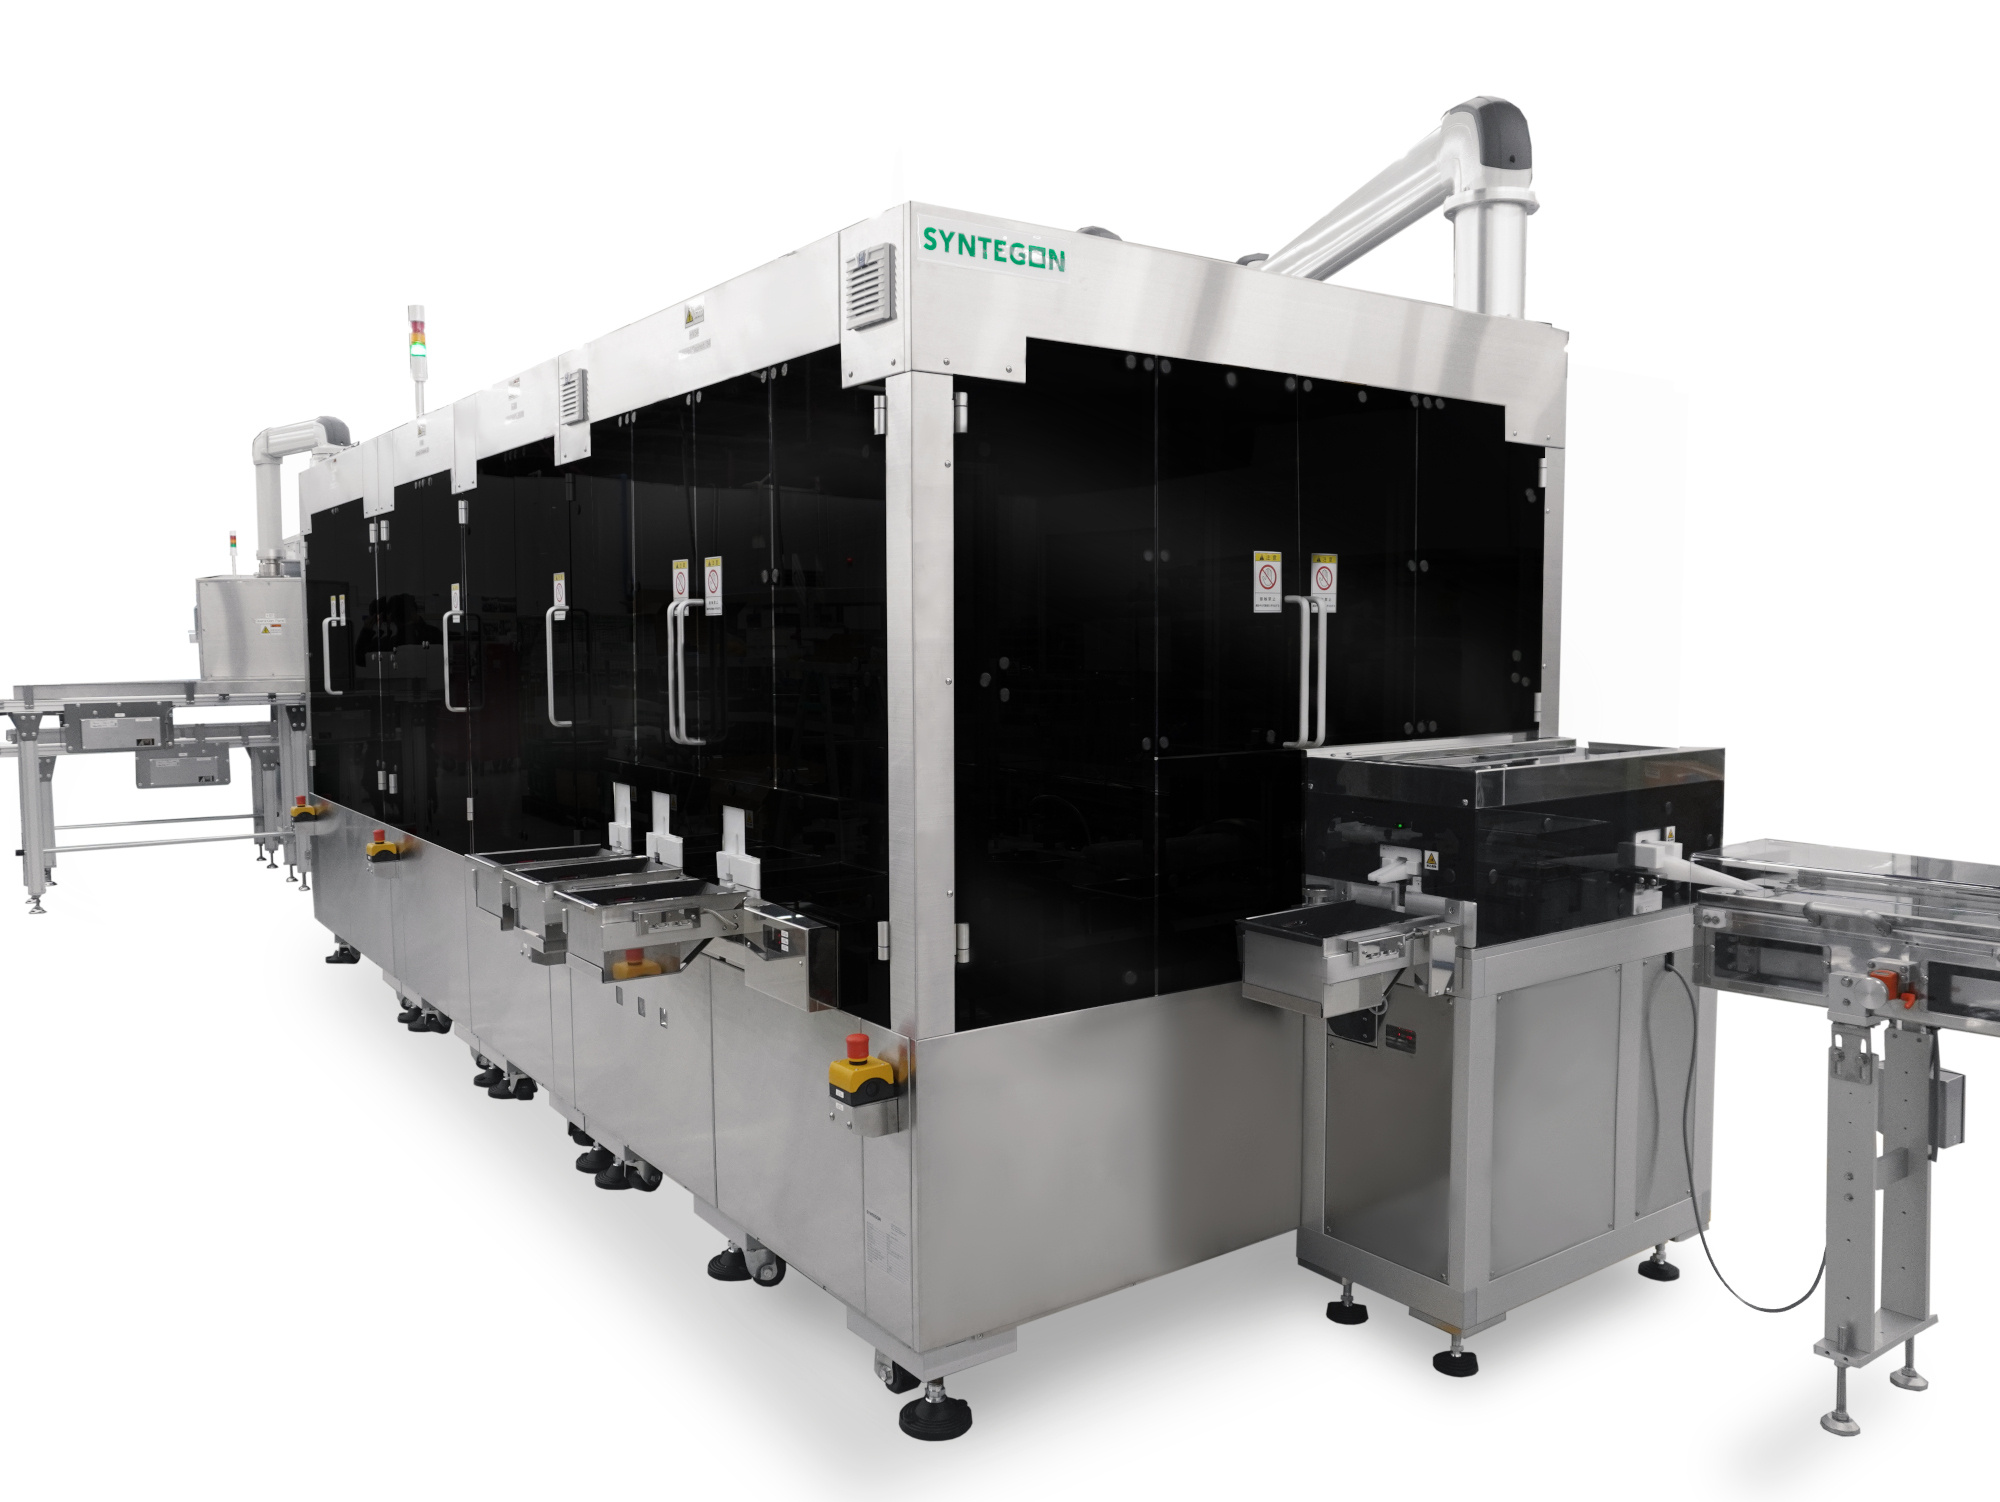 At Achema, the company will demonstrate how the AIM5 for vials serves to combine visual inspection and container closure integrity testing (CCIT) on one machine to boost efficiency and save space.